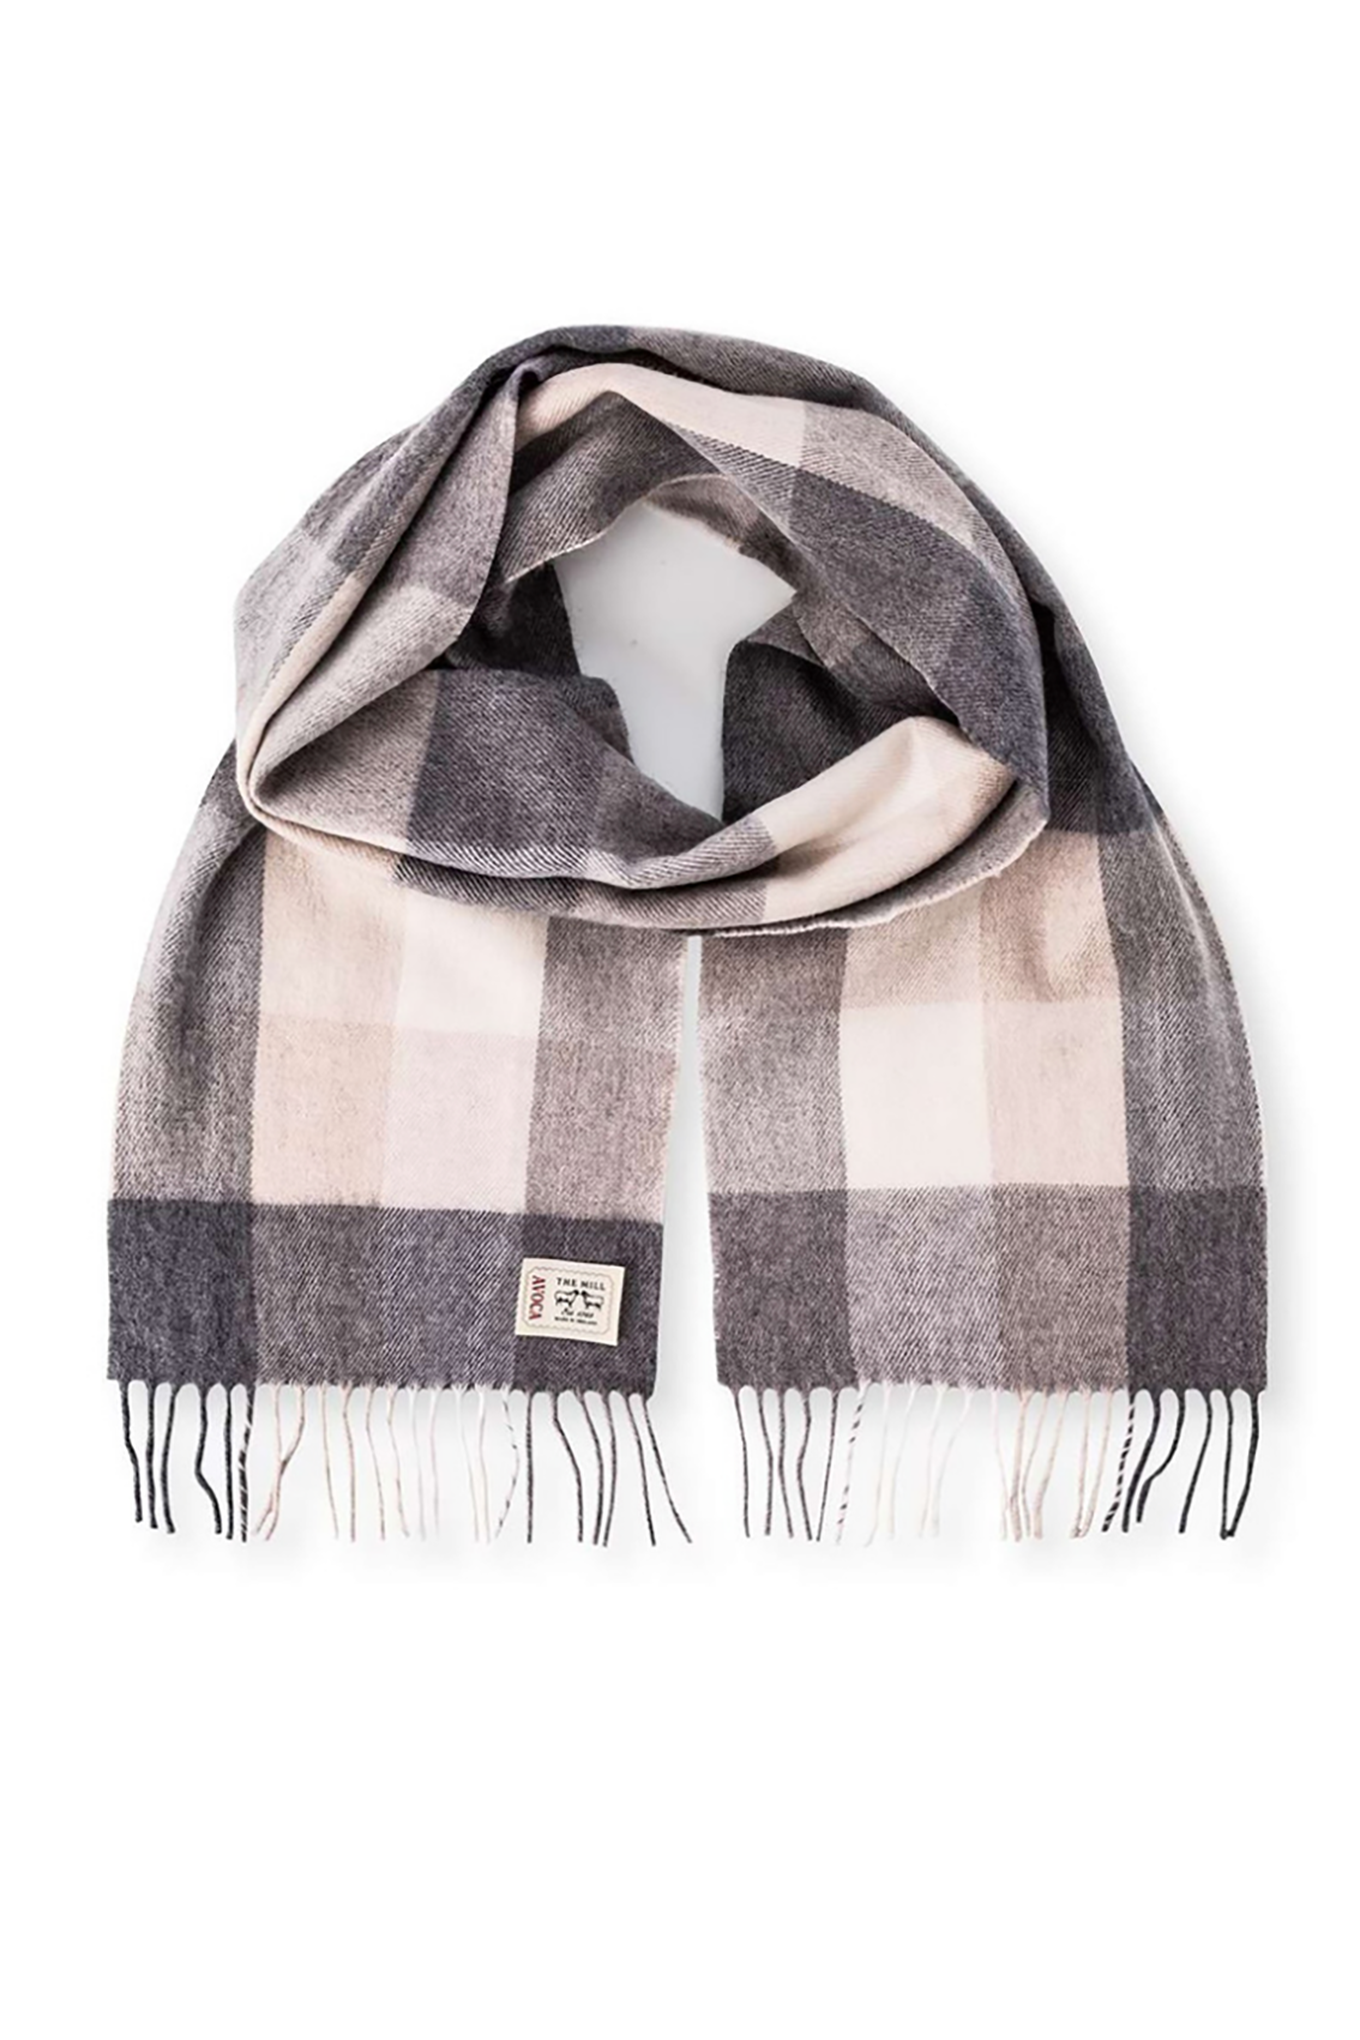 Avoca the Mill made in Ireland fine merino wool scarf in Rome check print, neutral tones.